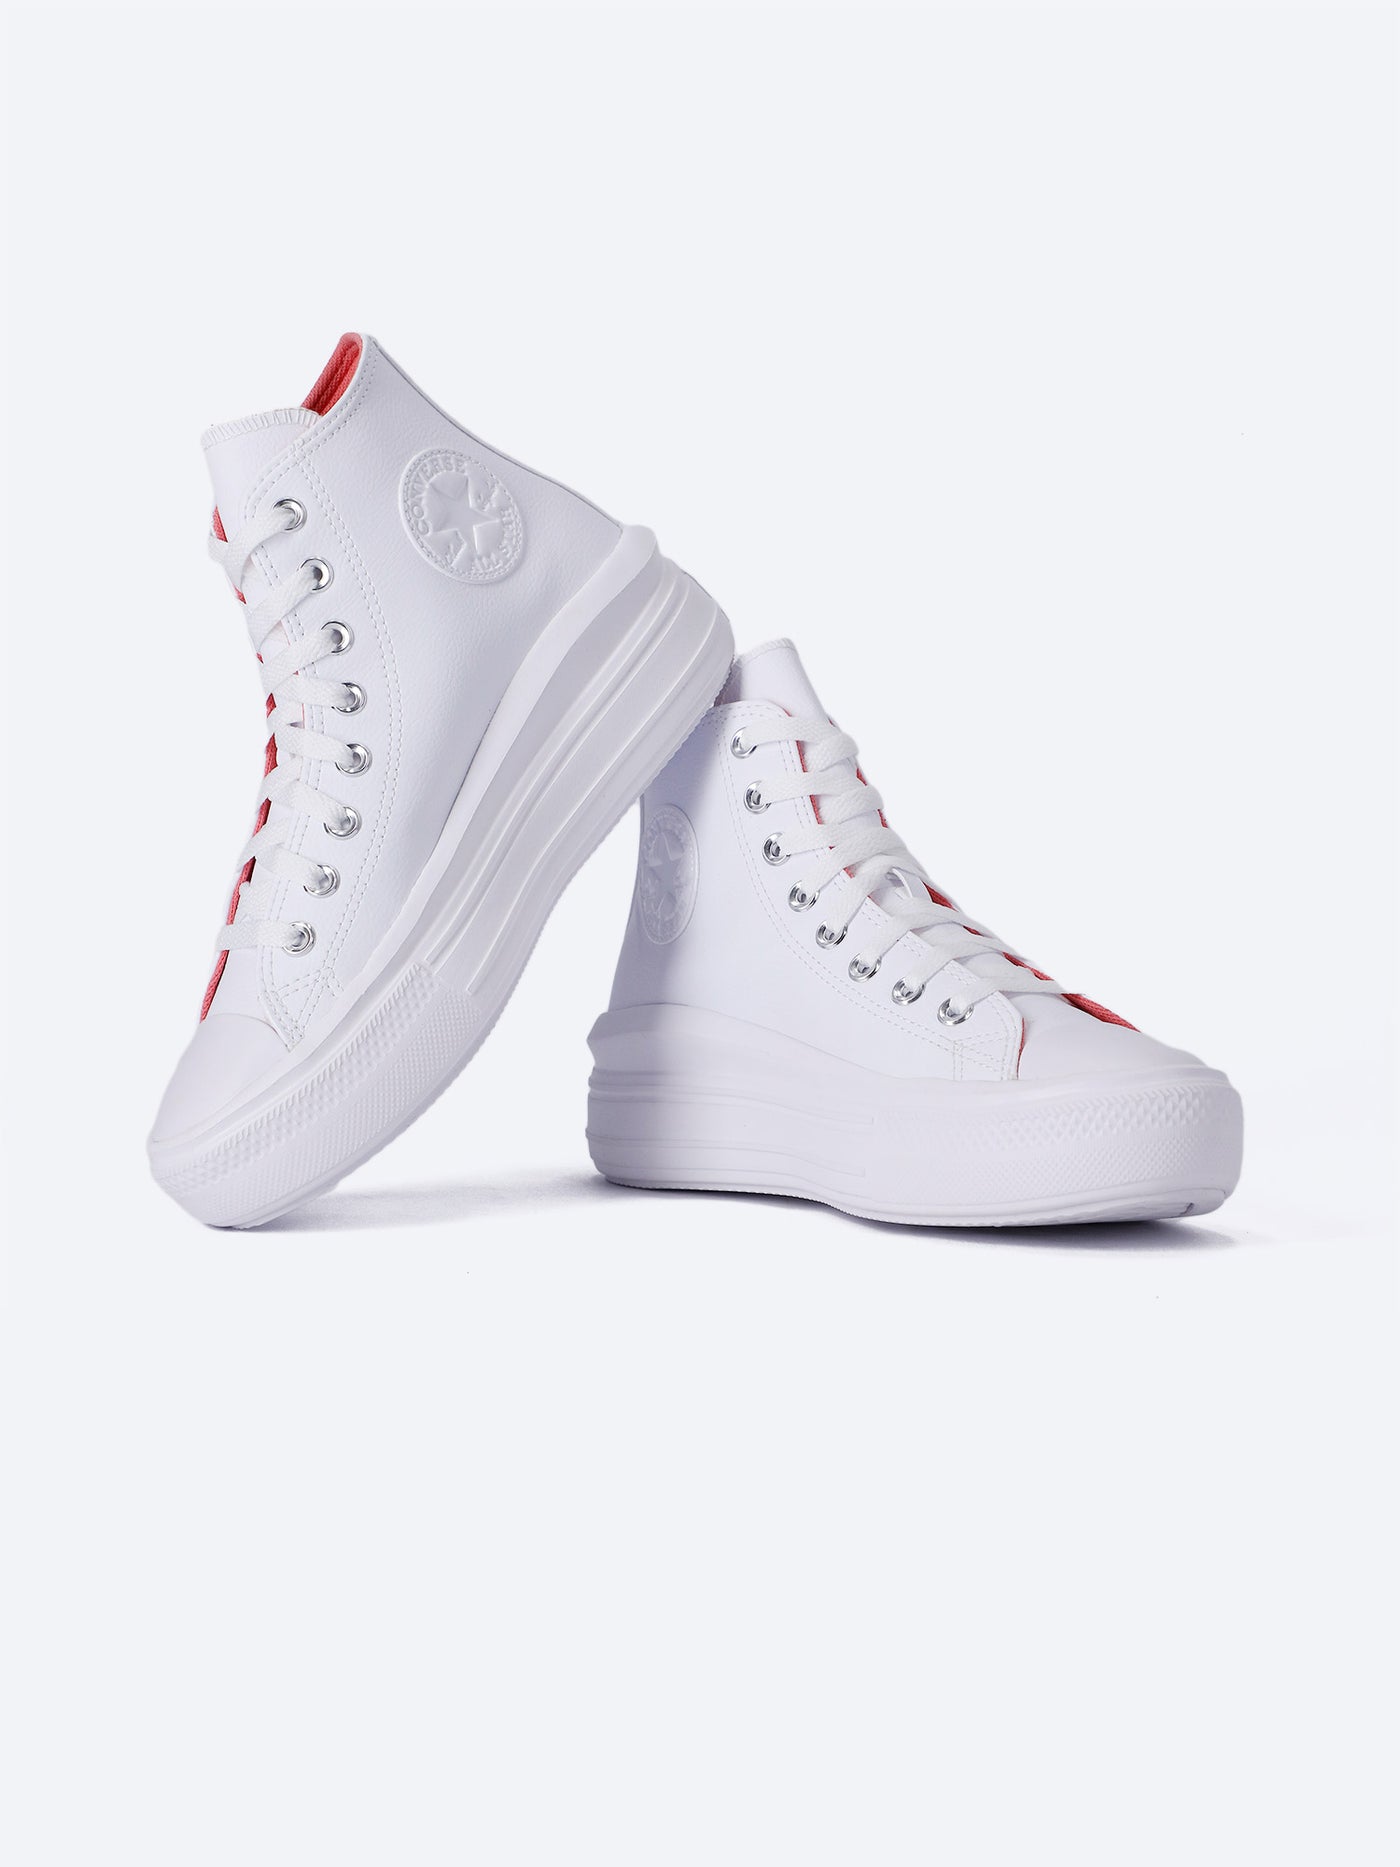 Converse Women's Chuck Taylor All Star Move Hybrid Shine Sneaker Shoes